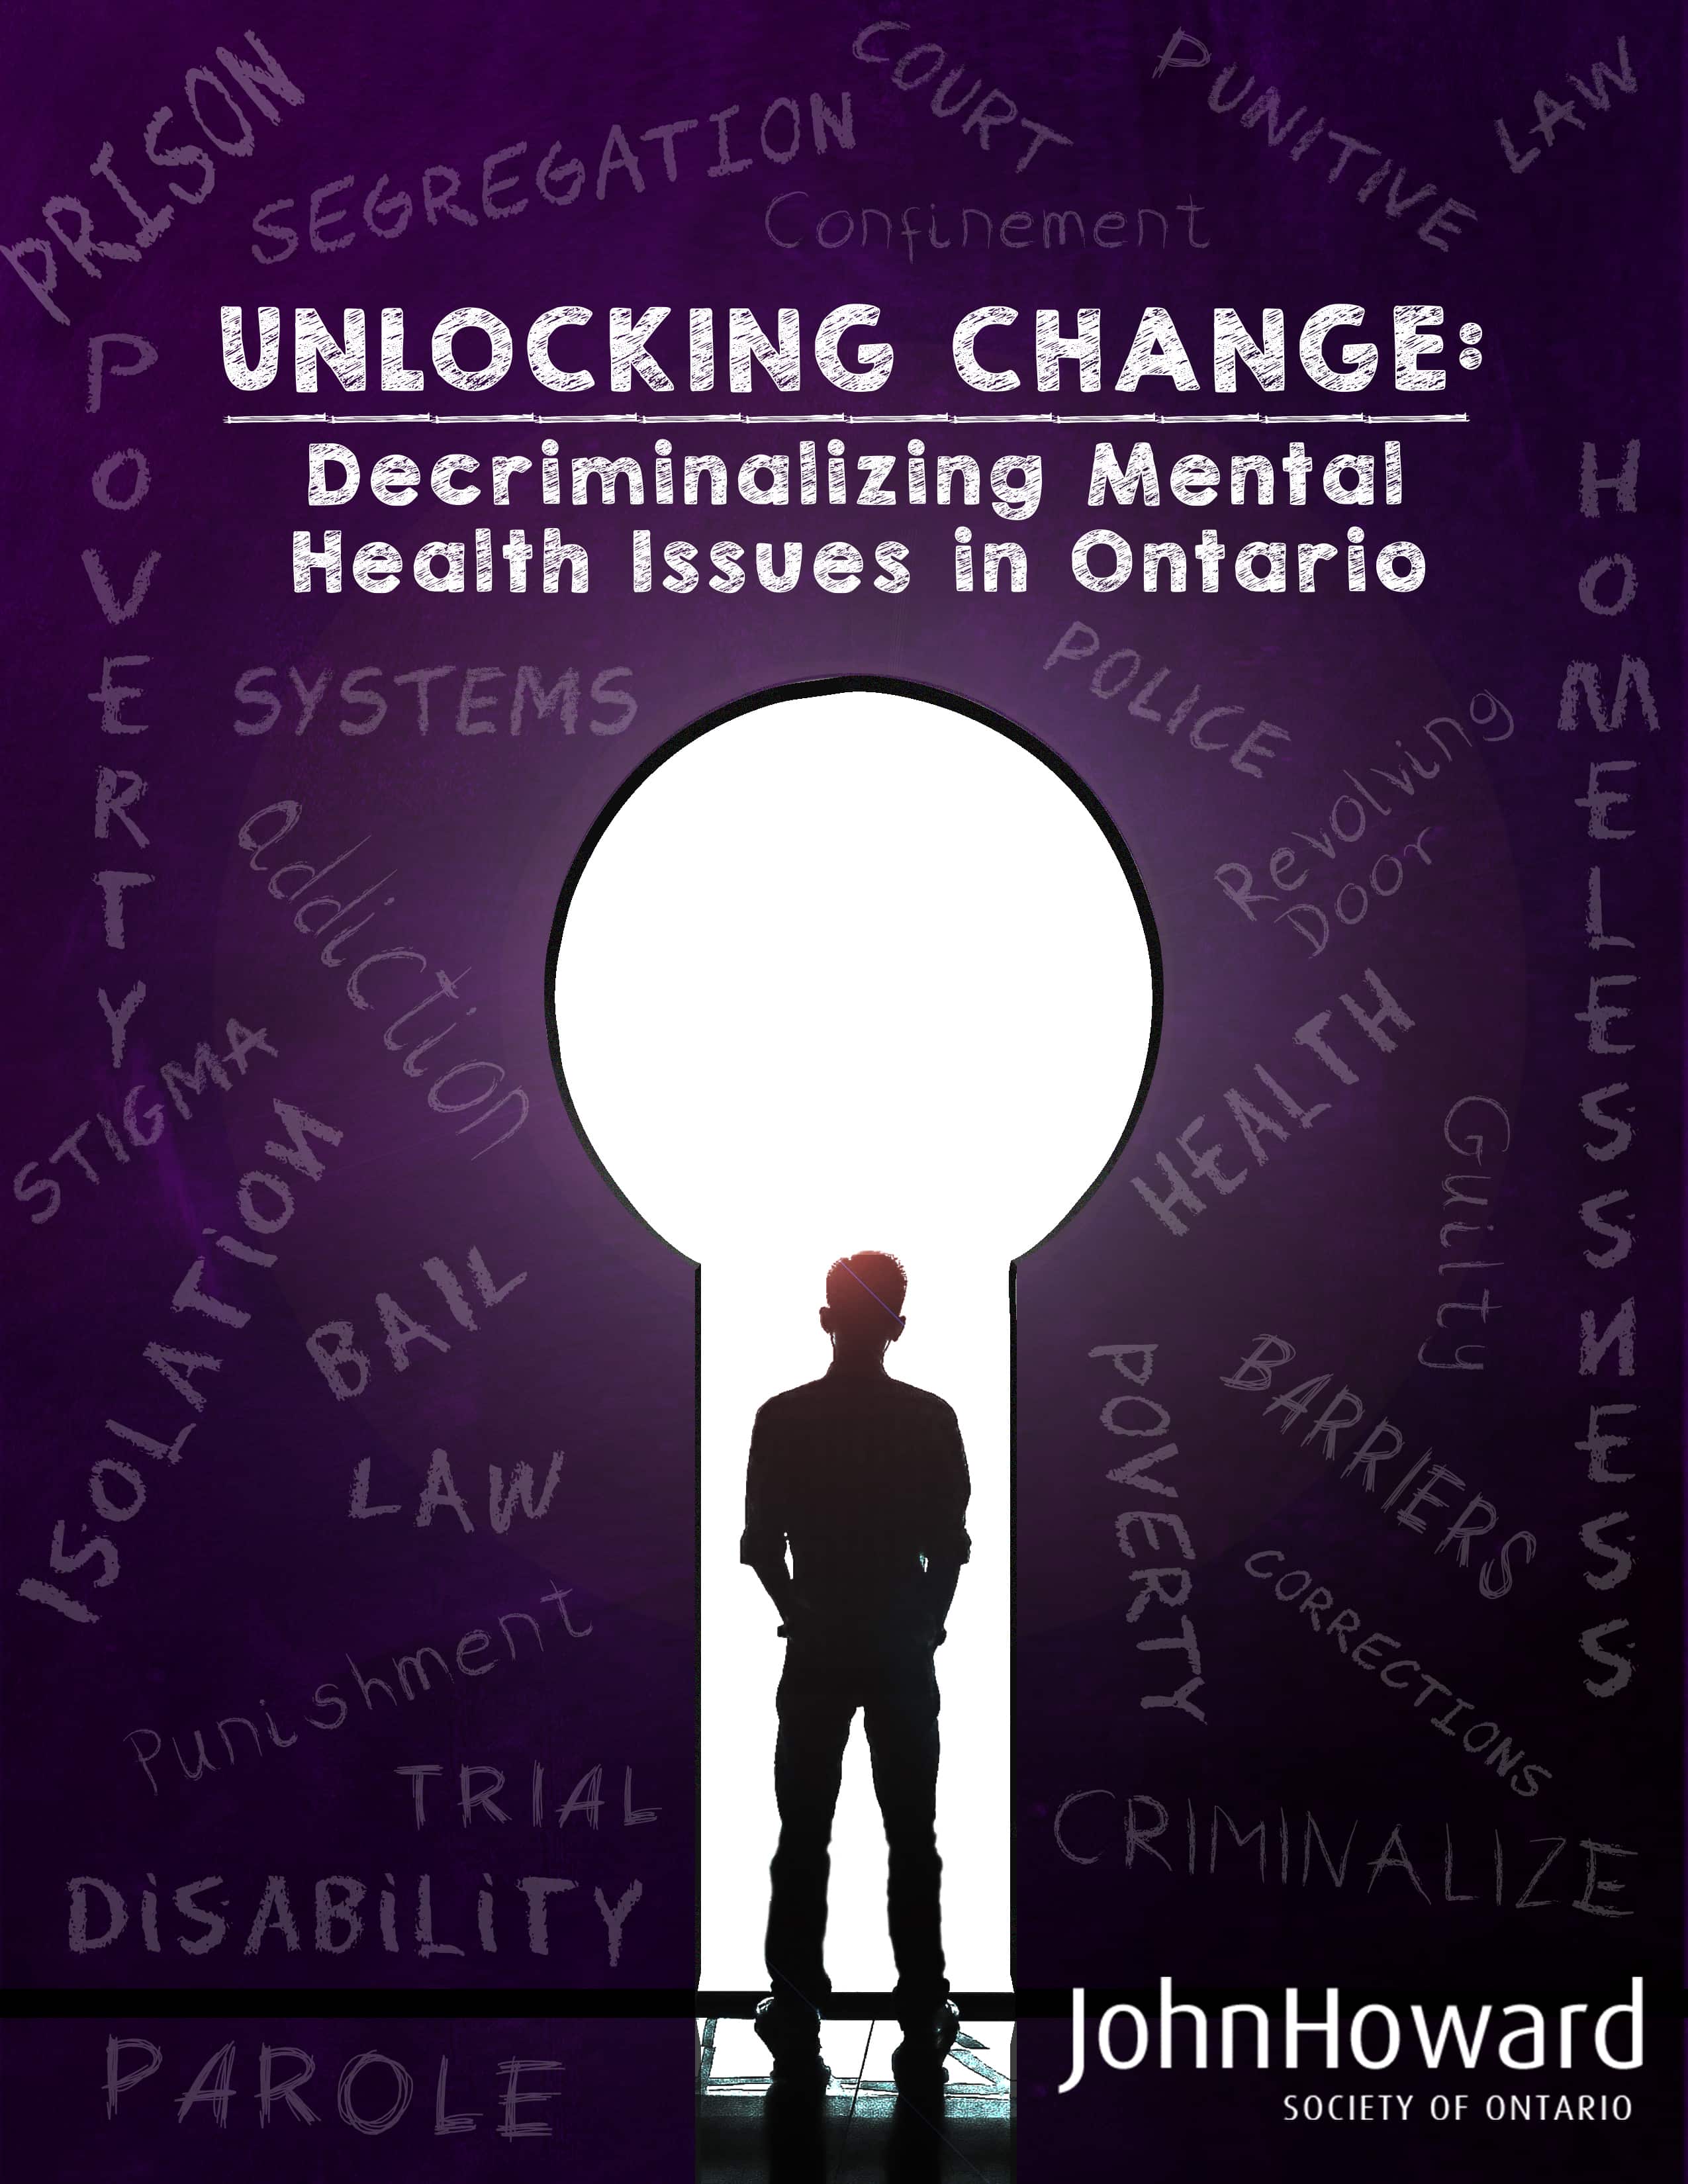 Cover of unlocking change report with a person standing inside a keyhole